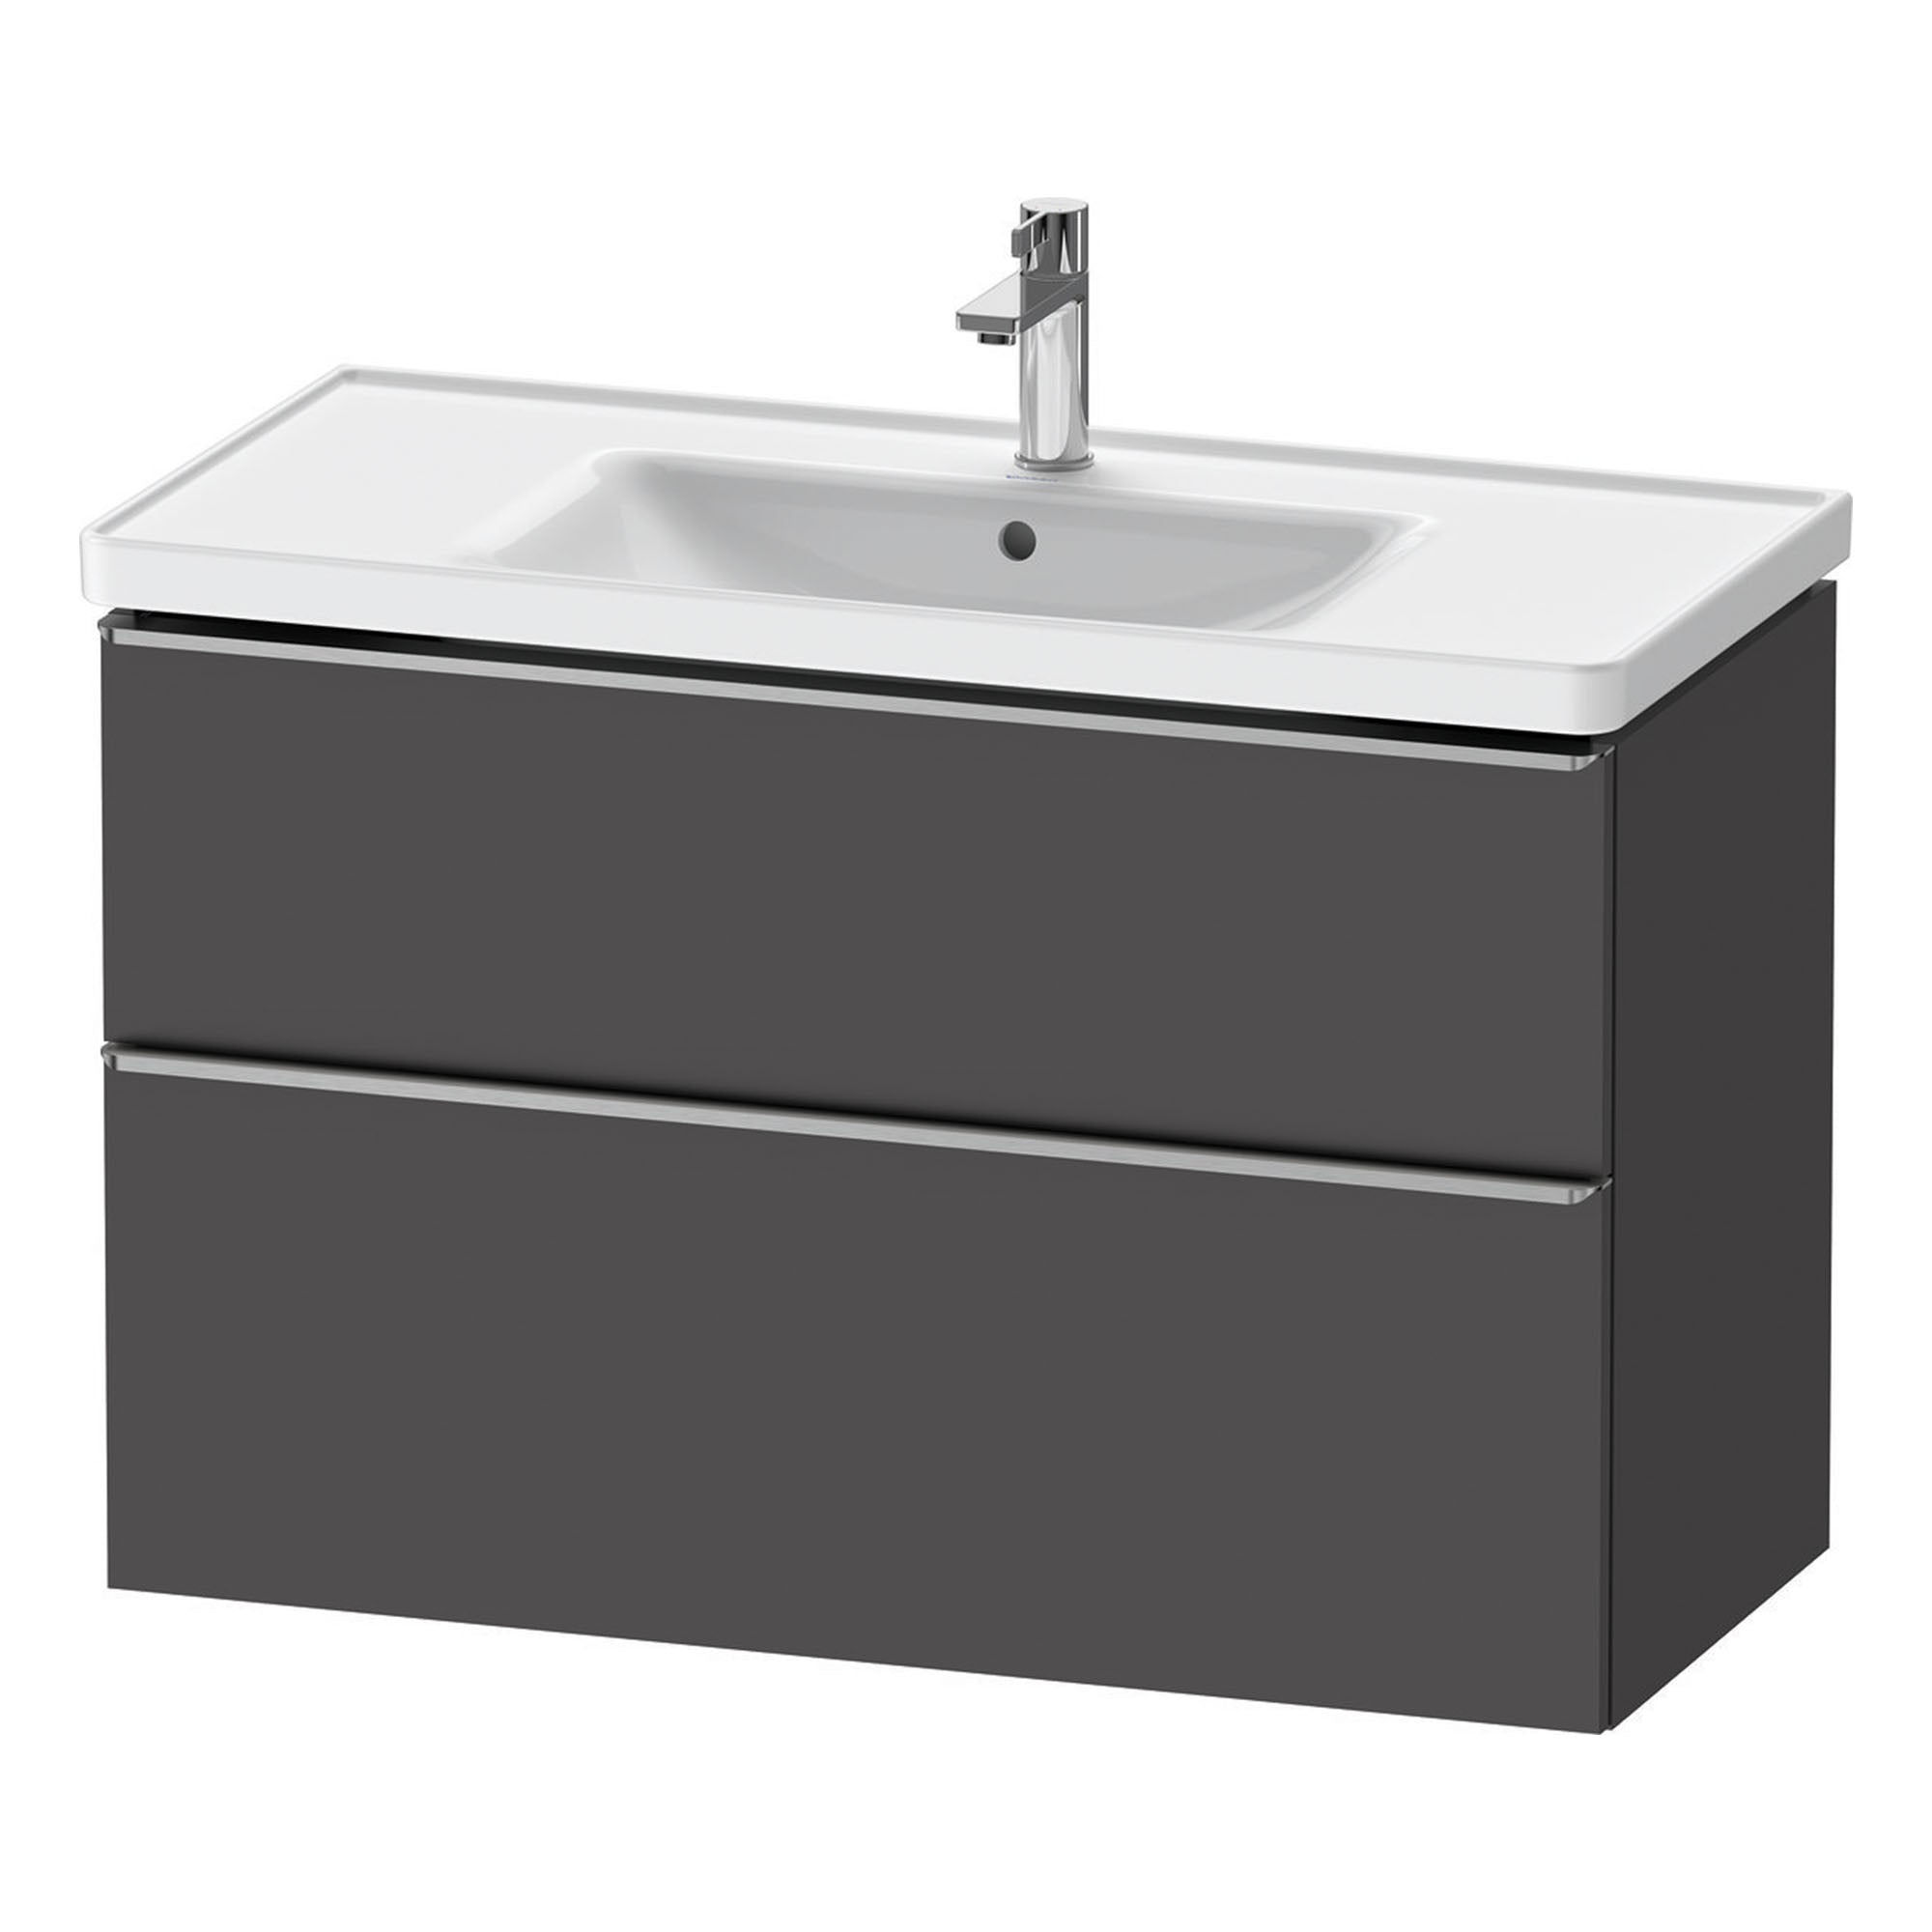 duravit d-neo 1000mm wall mounted vanity unit with d-neo basin matt graphite stainless steel handles